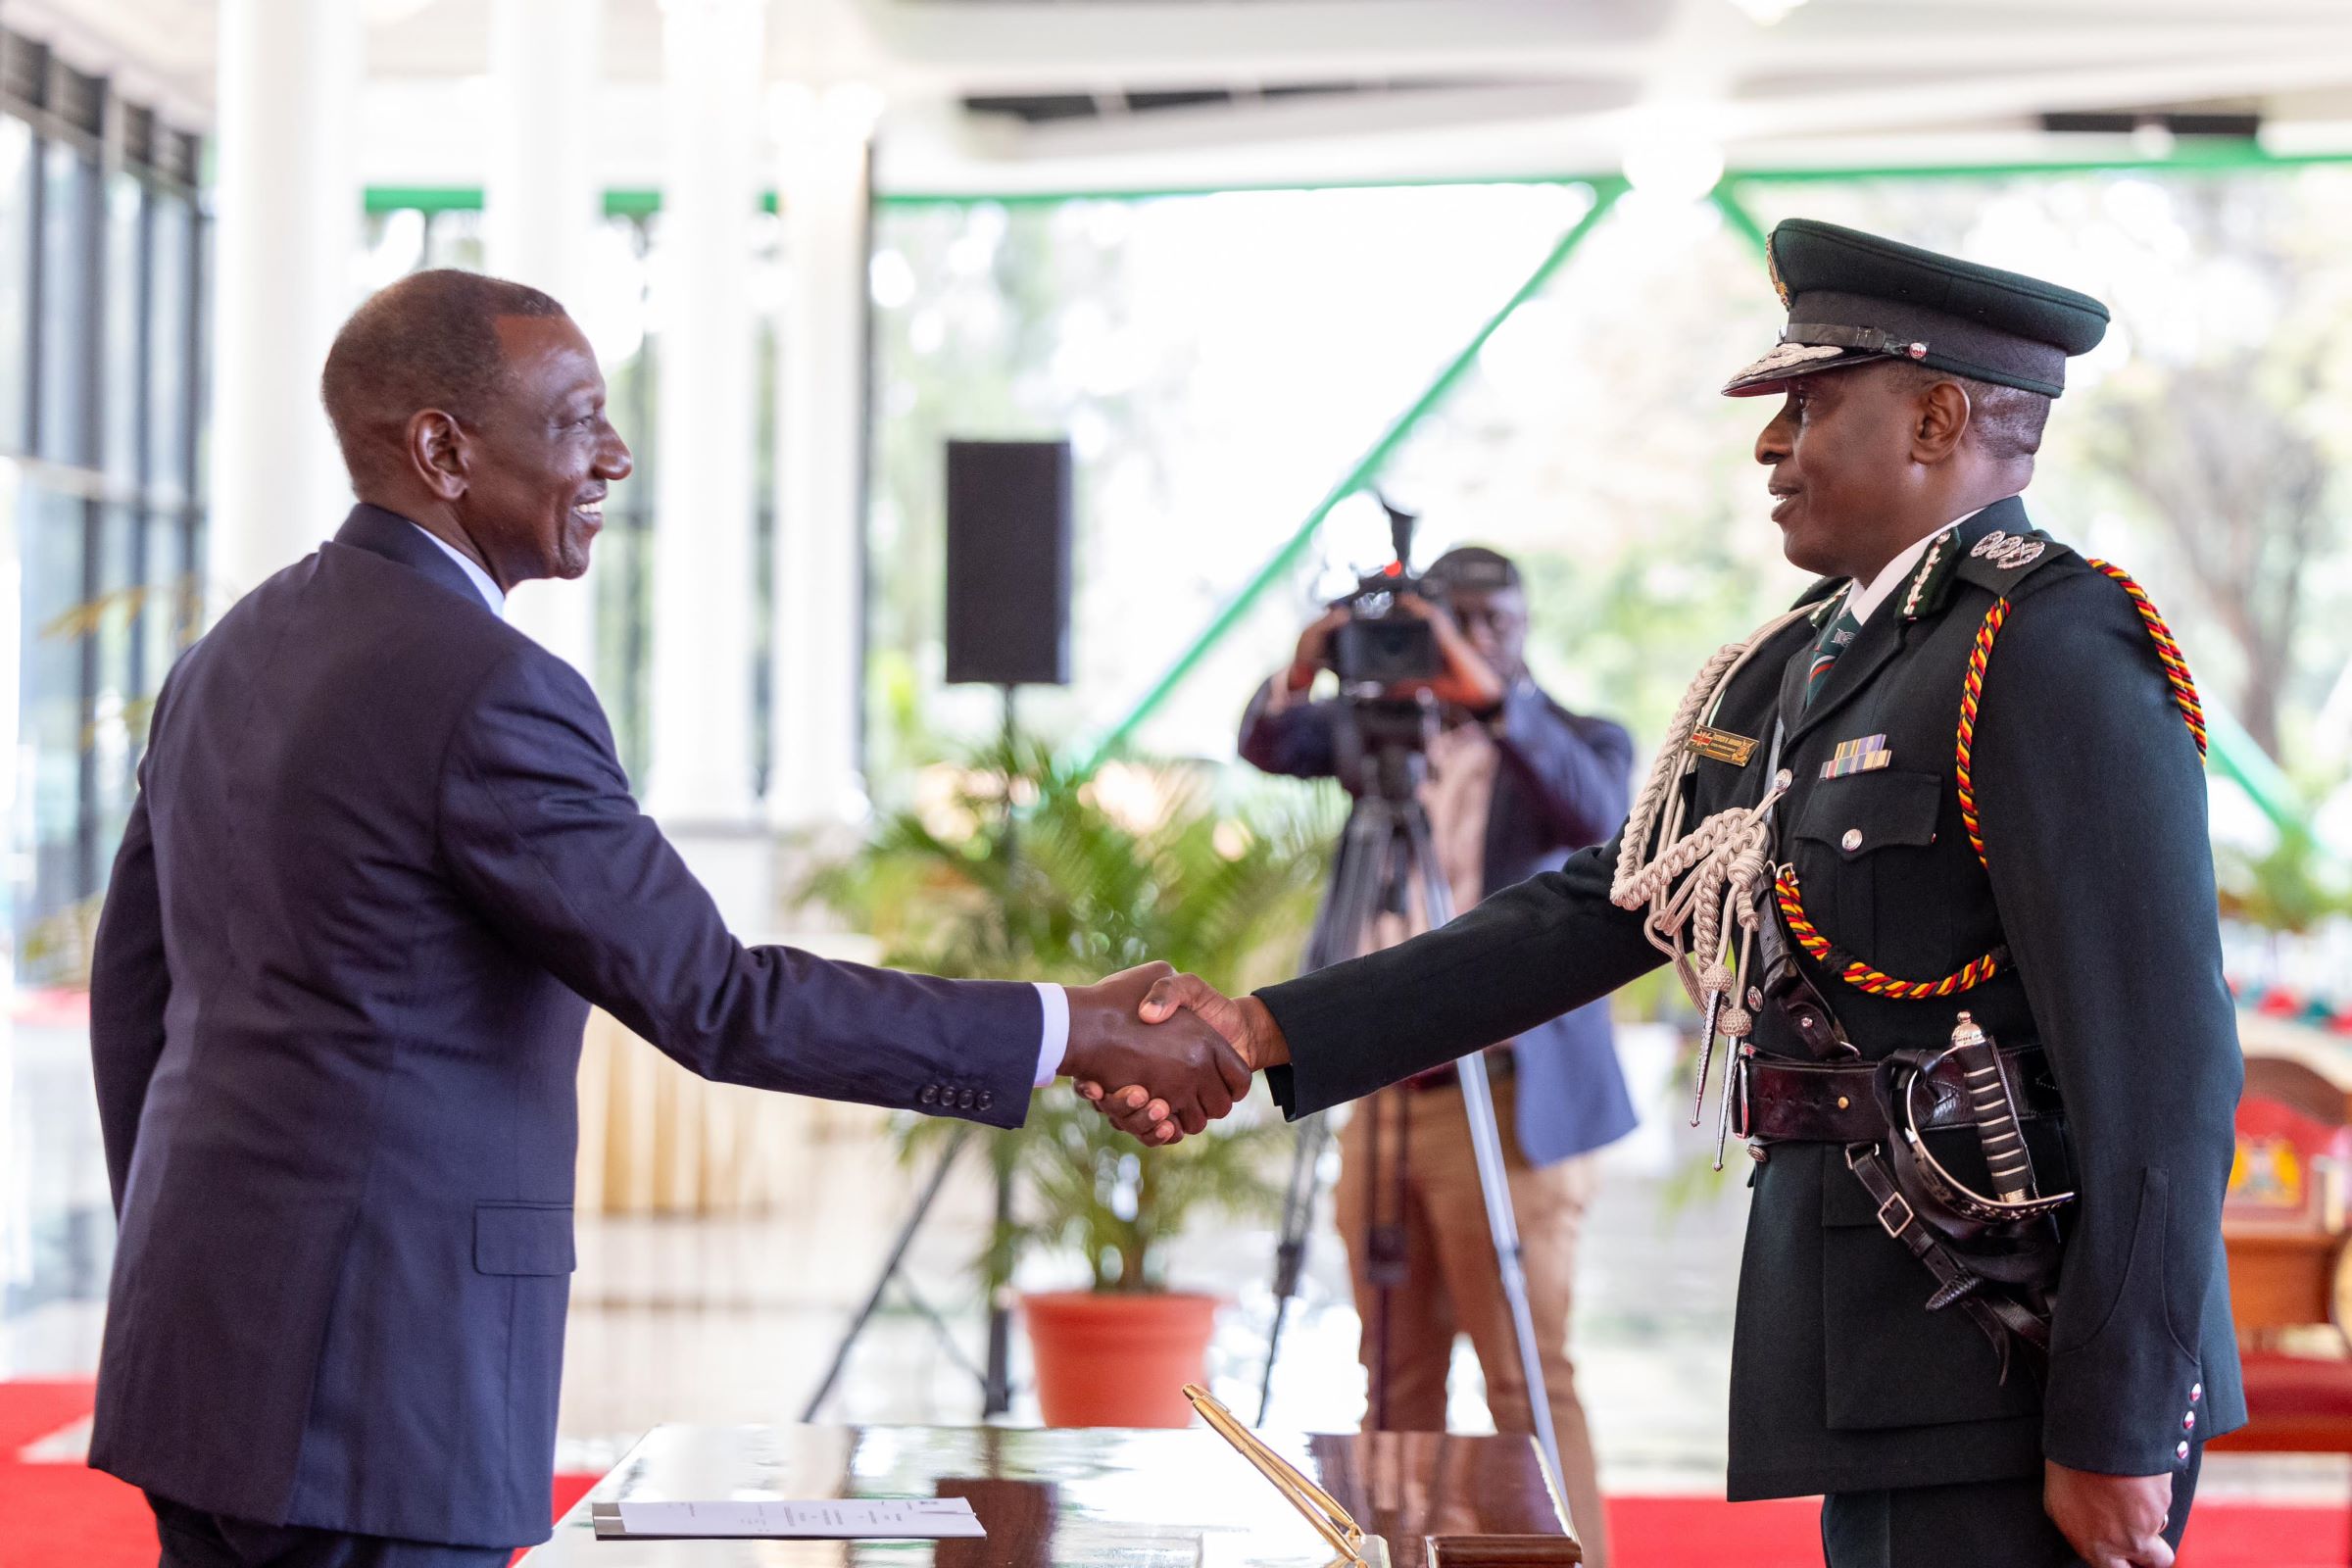 Pay rise for police, prison officers to begin this month - Ruto